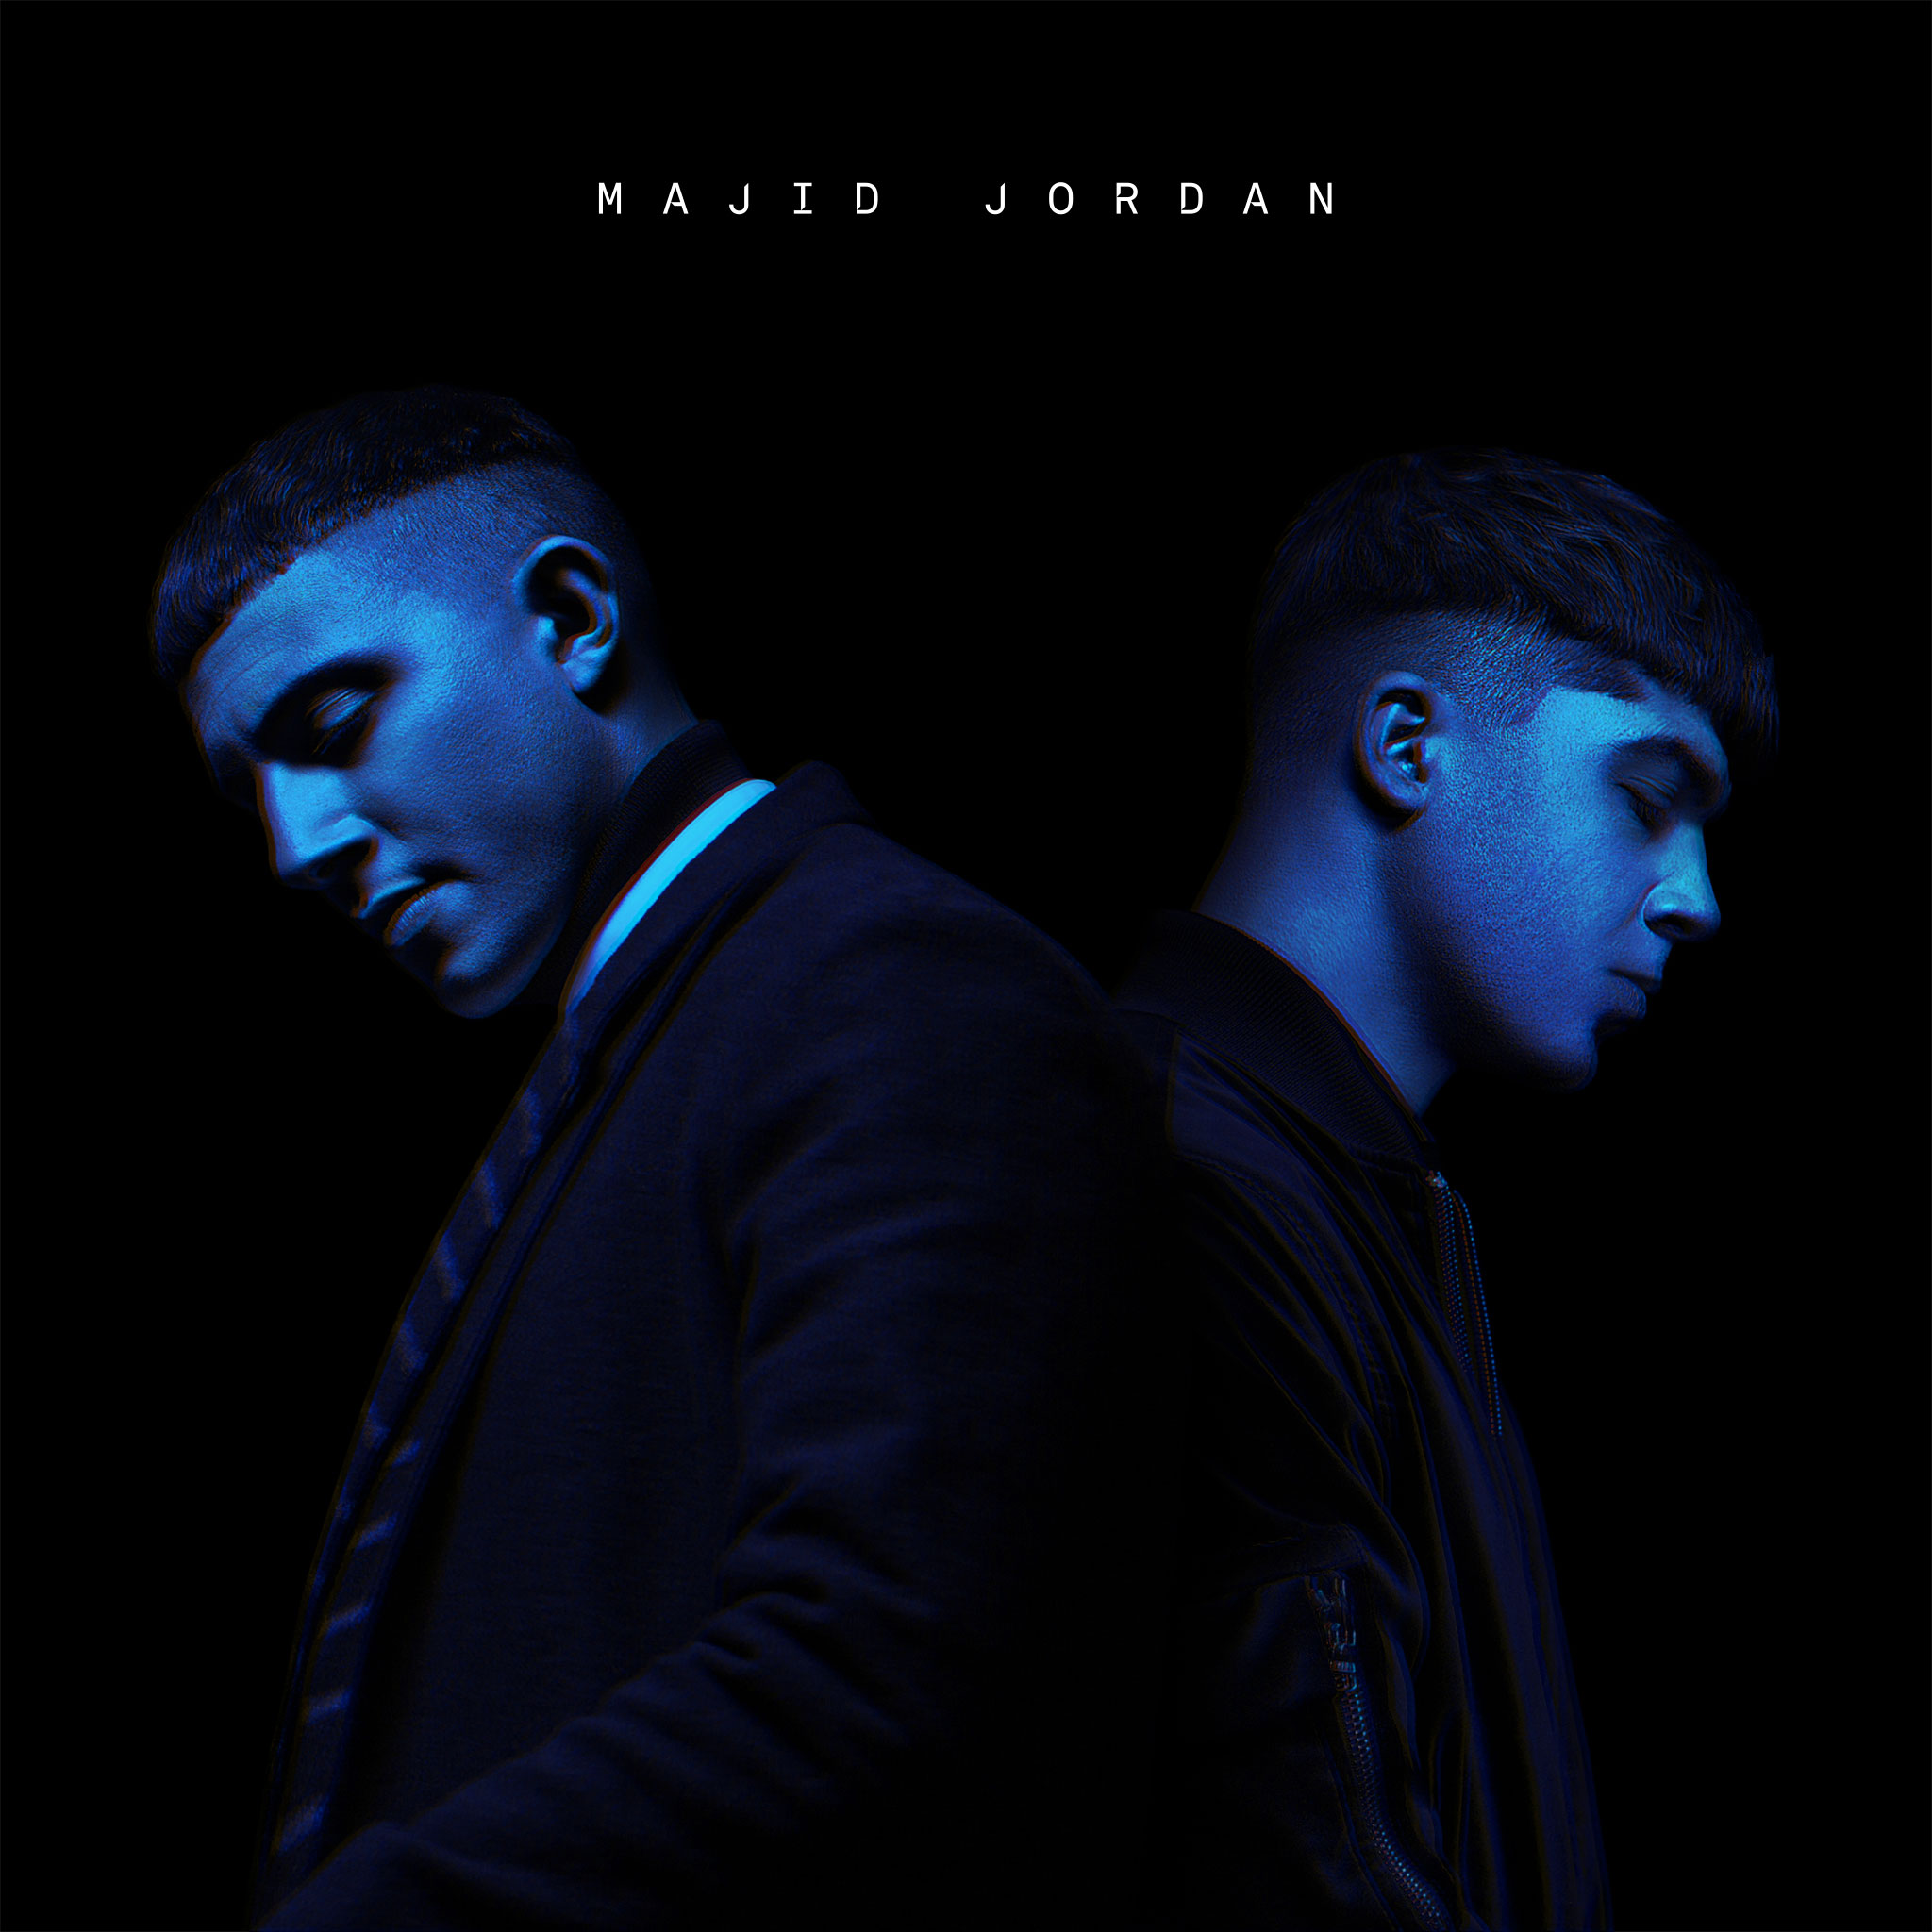 Interview 10 things we learned in conversation with Majid Jordan